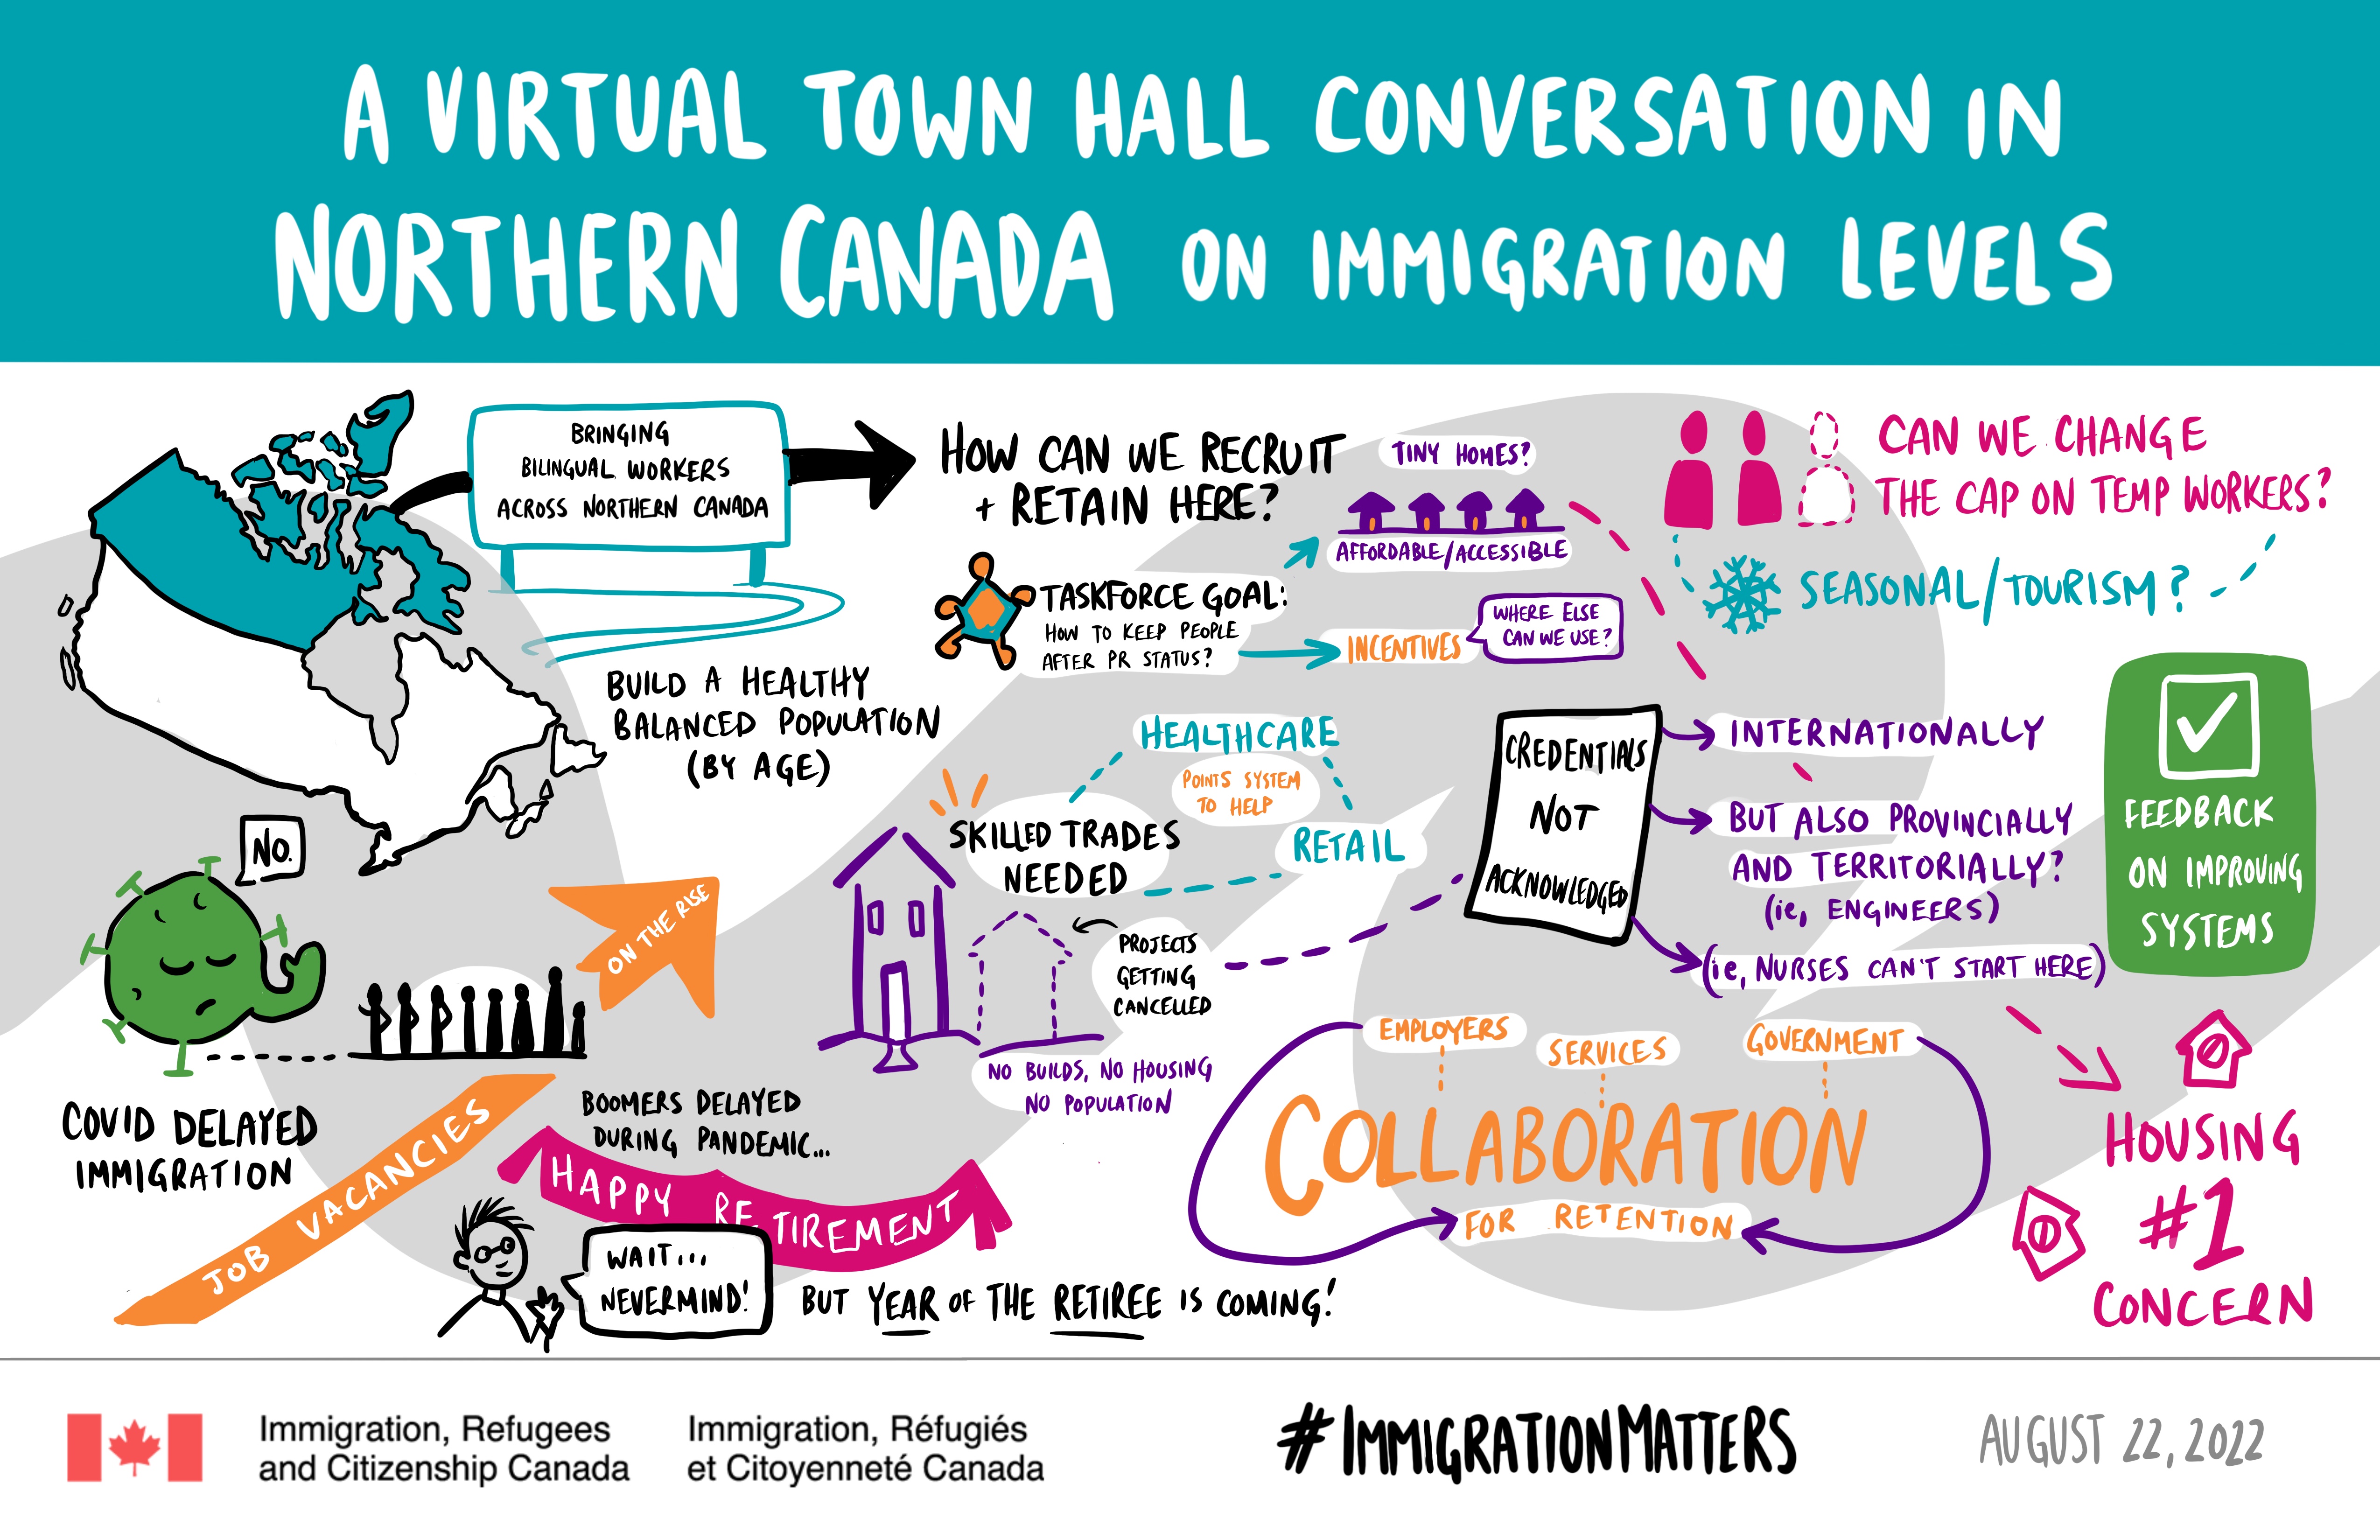 A virtual town hall conversation in Northern Canada on immigration levels